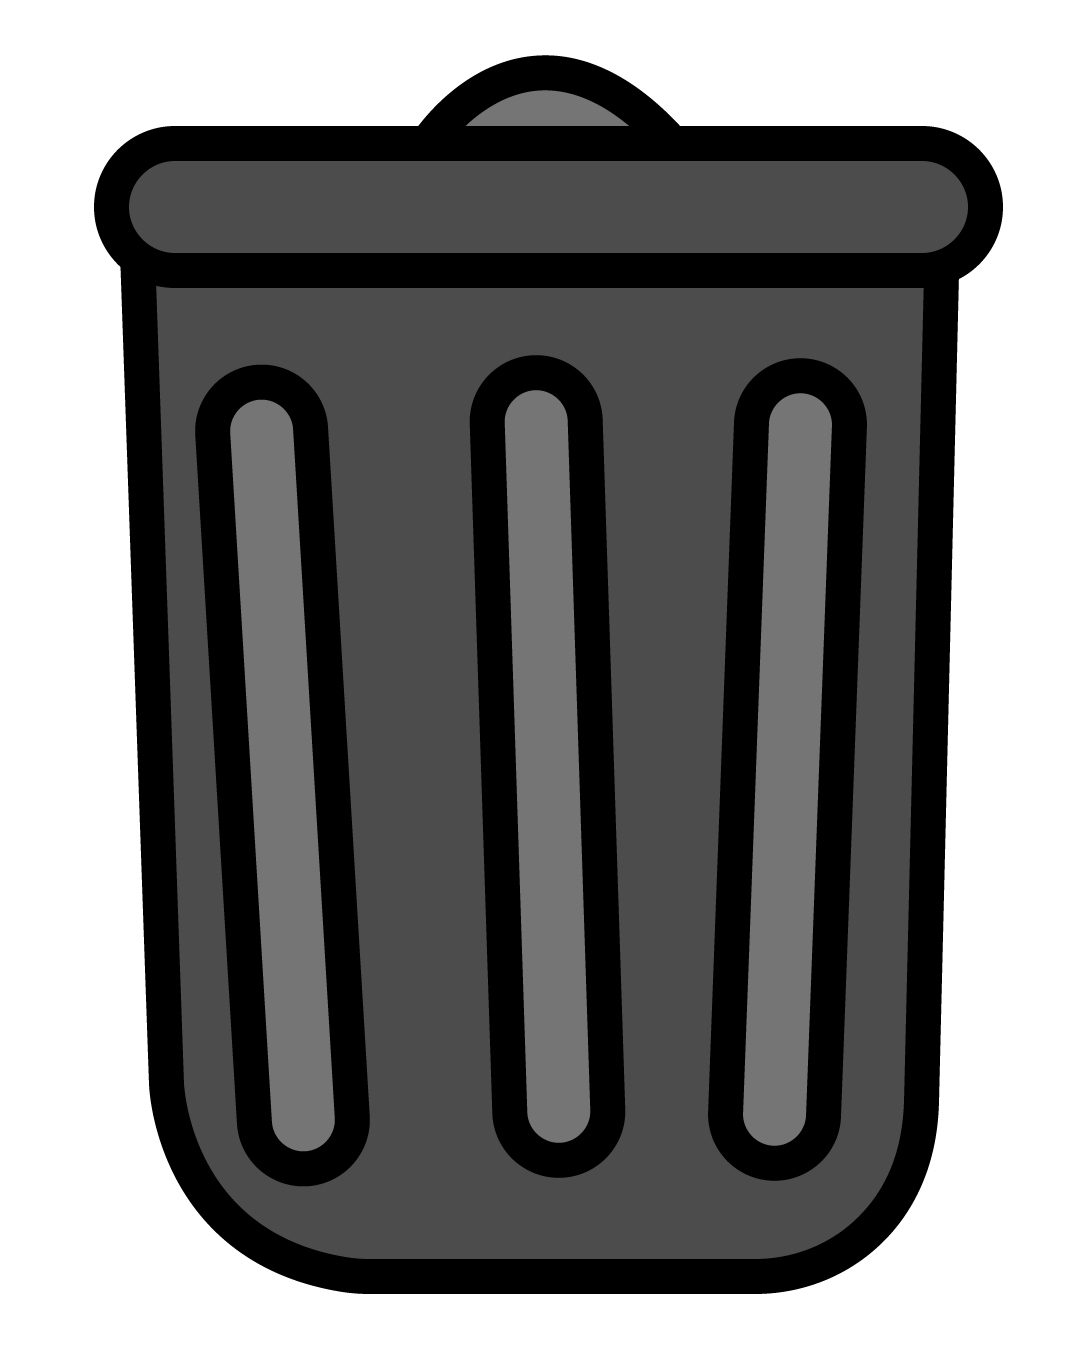 How To Draw Trash Can In Simple Steps